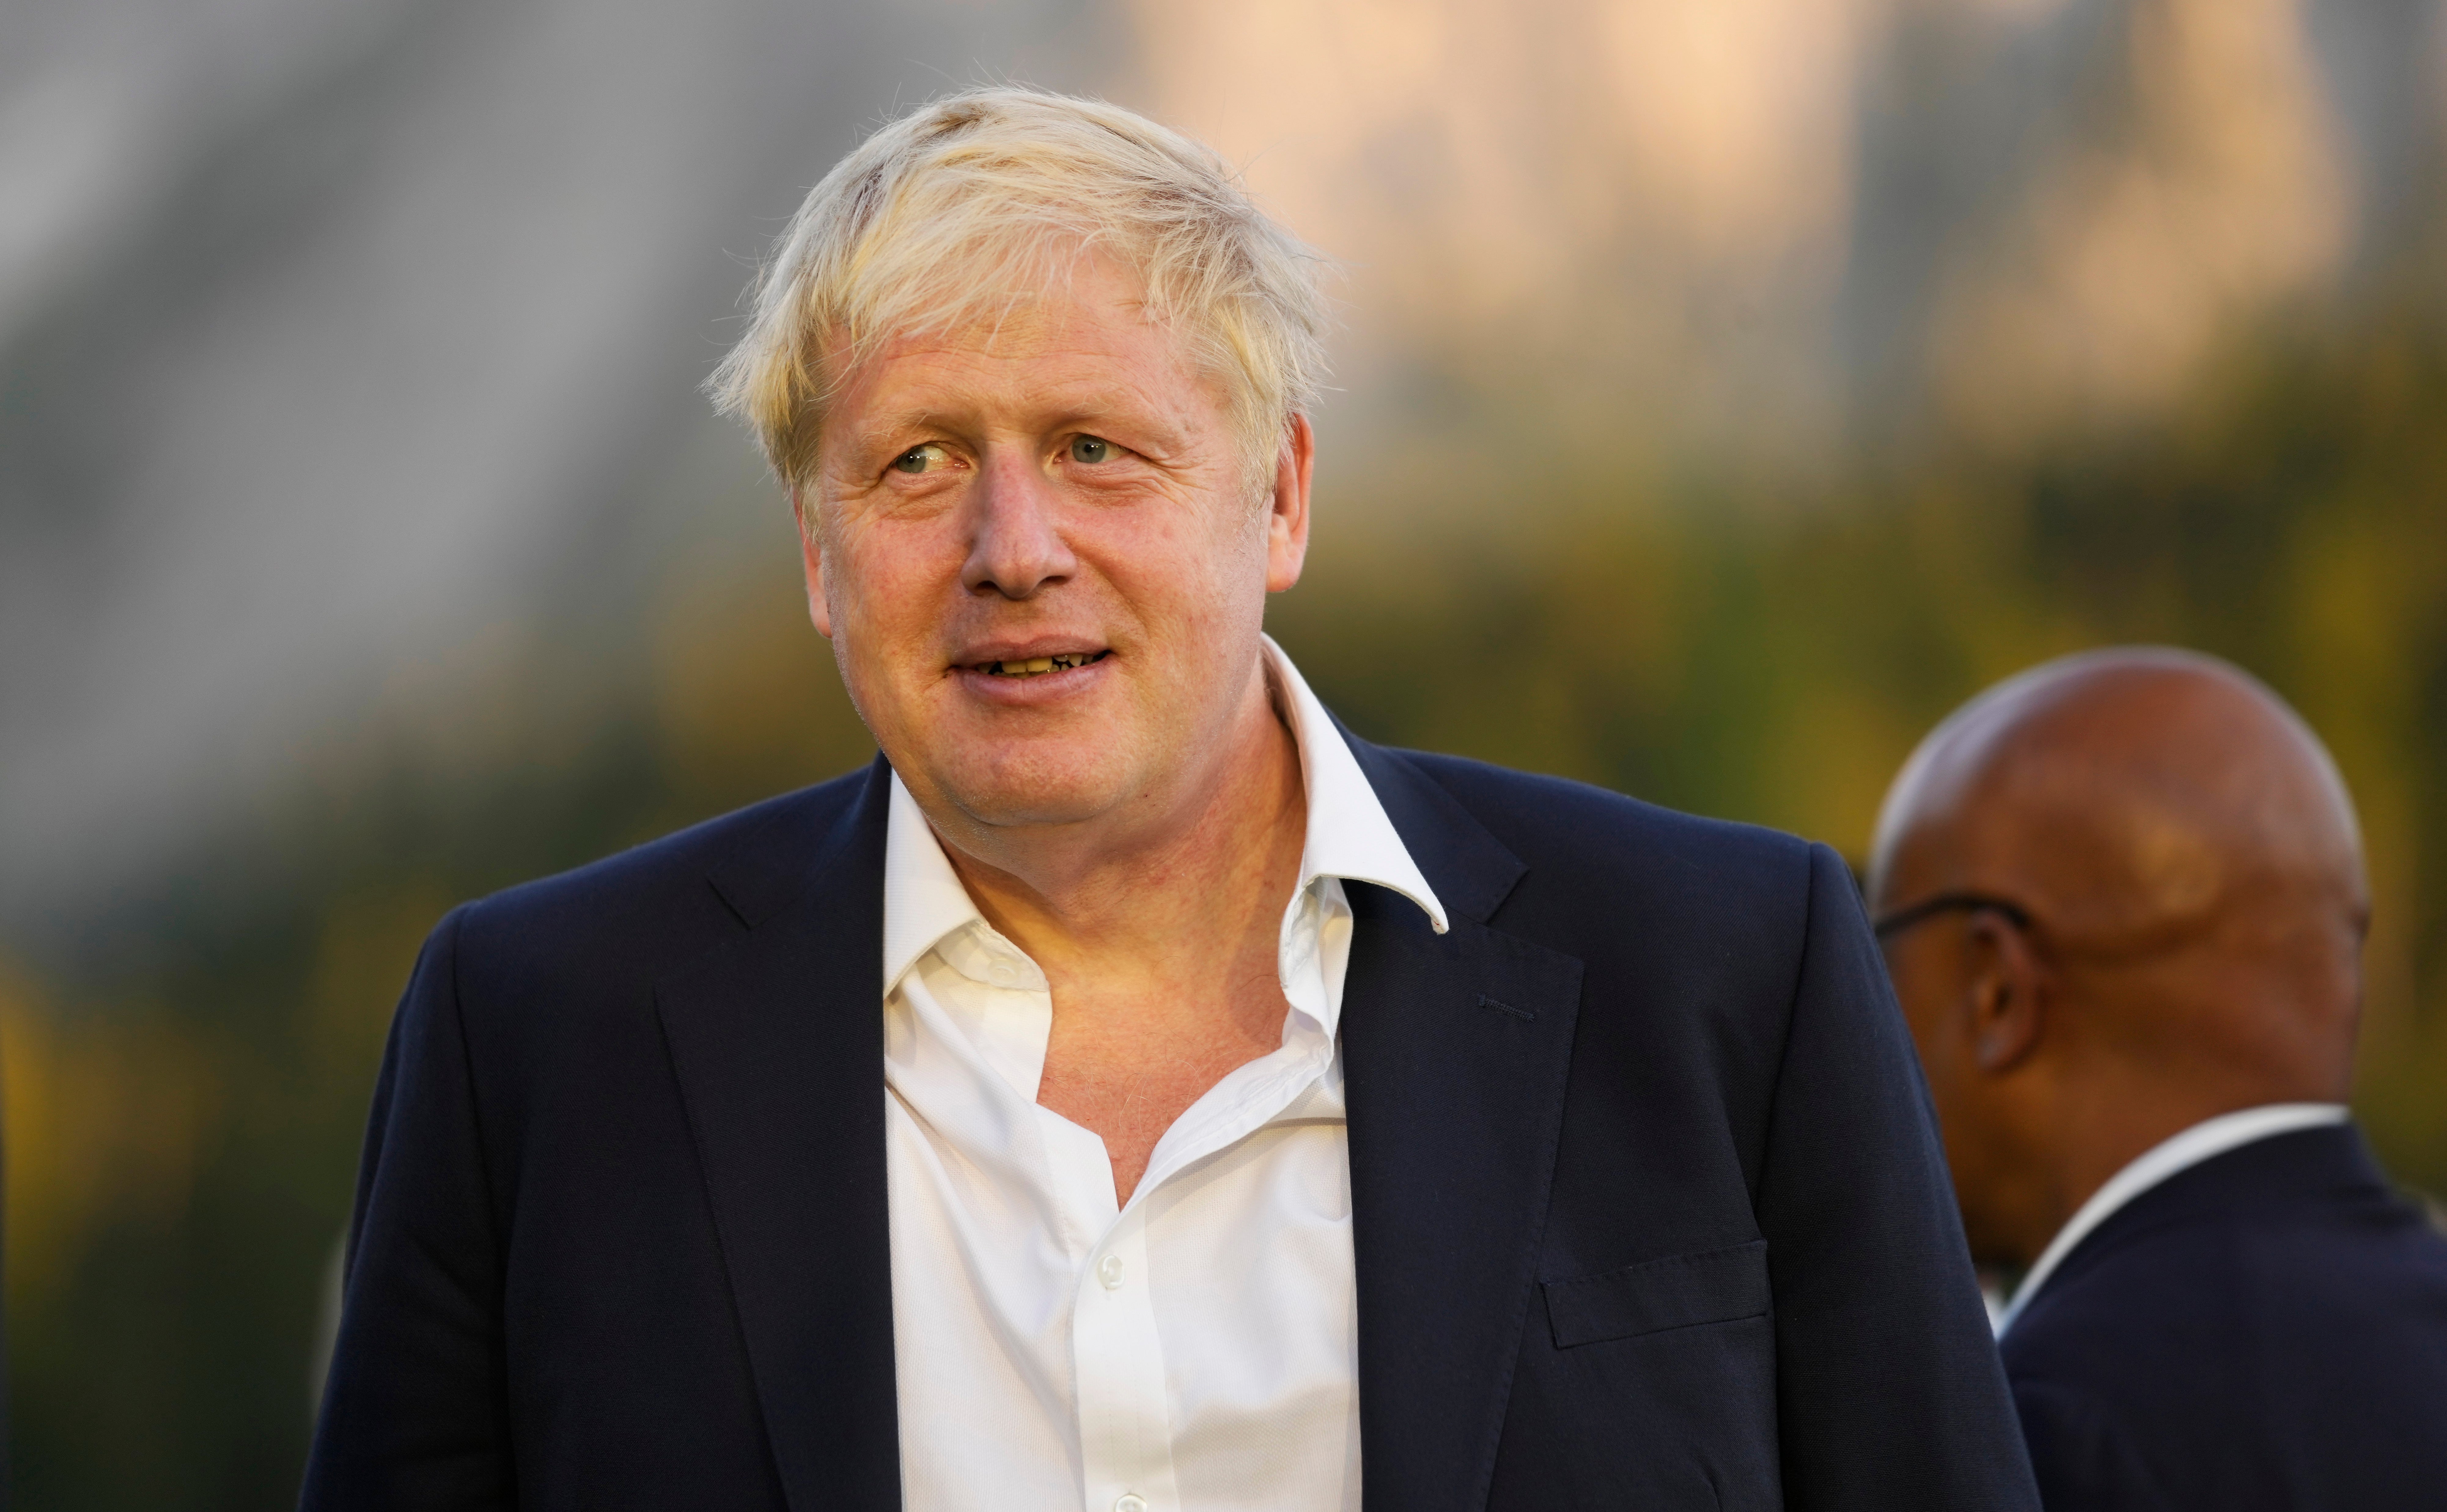 Boris Johnson is said th have joked about allegations about Chris Pincher before handing him a ministerial role